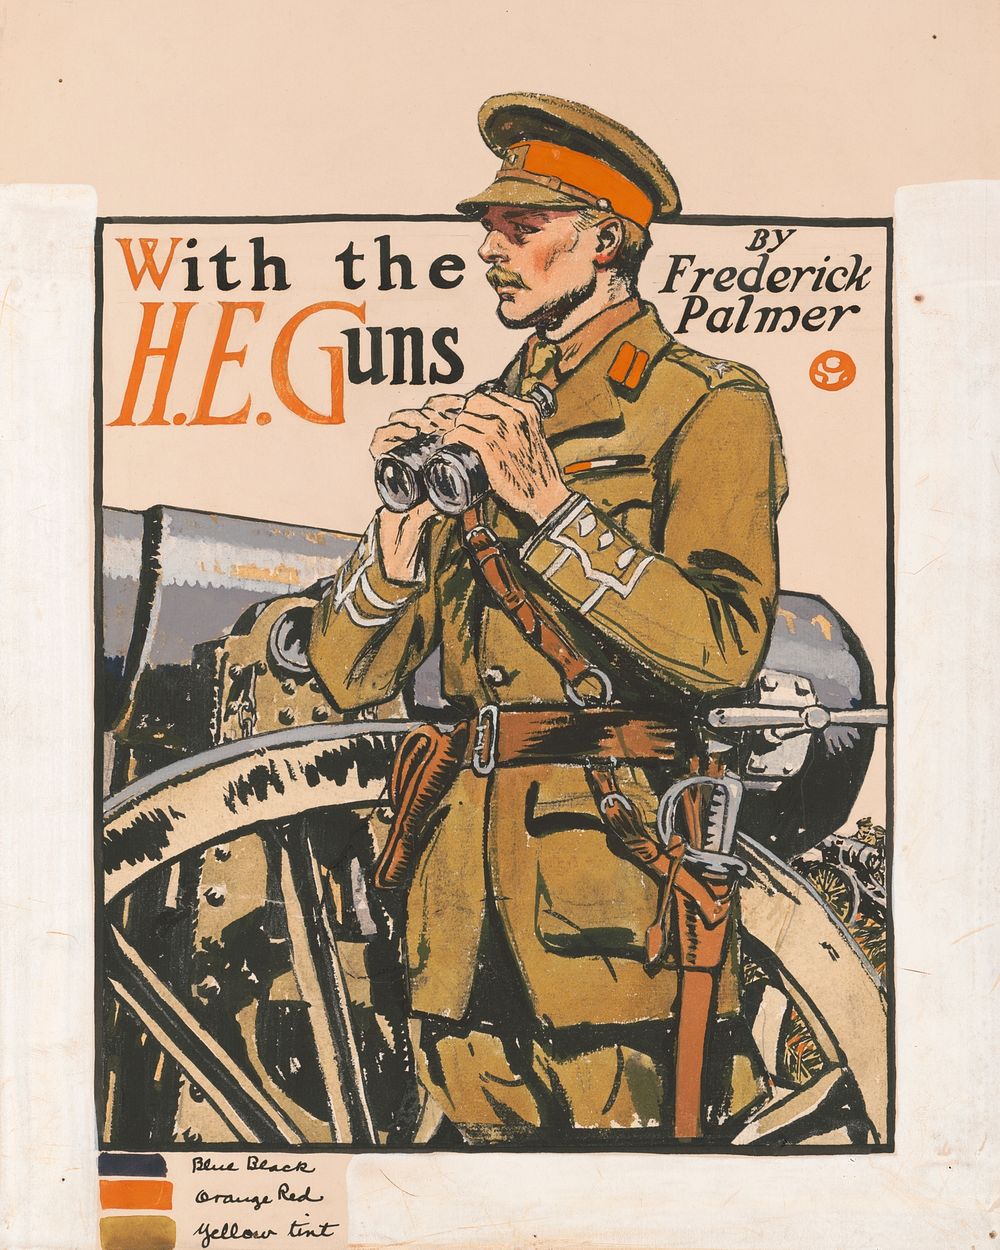 With the H.E. guns, by Frederick Palmer (1915) by Edward Penfield